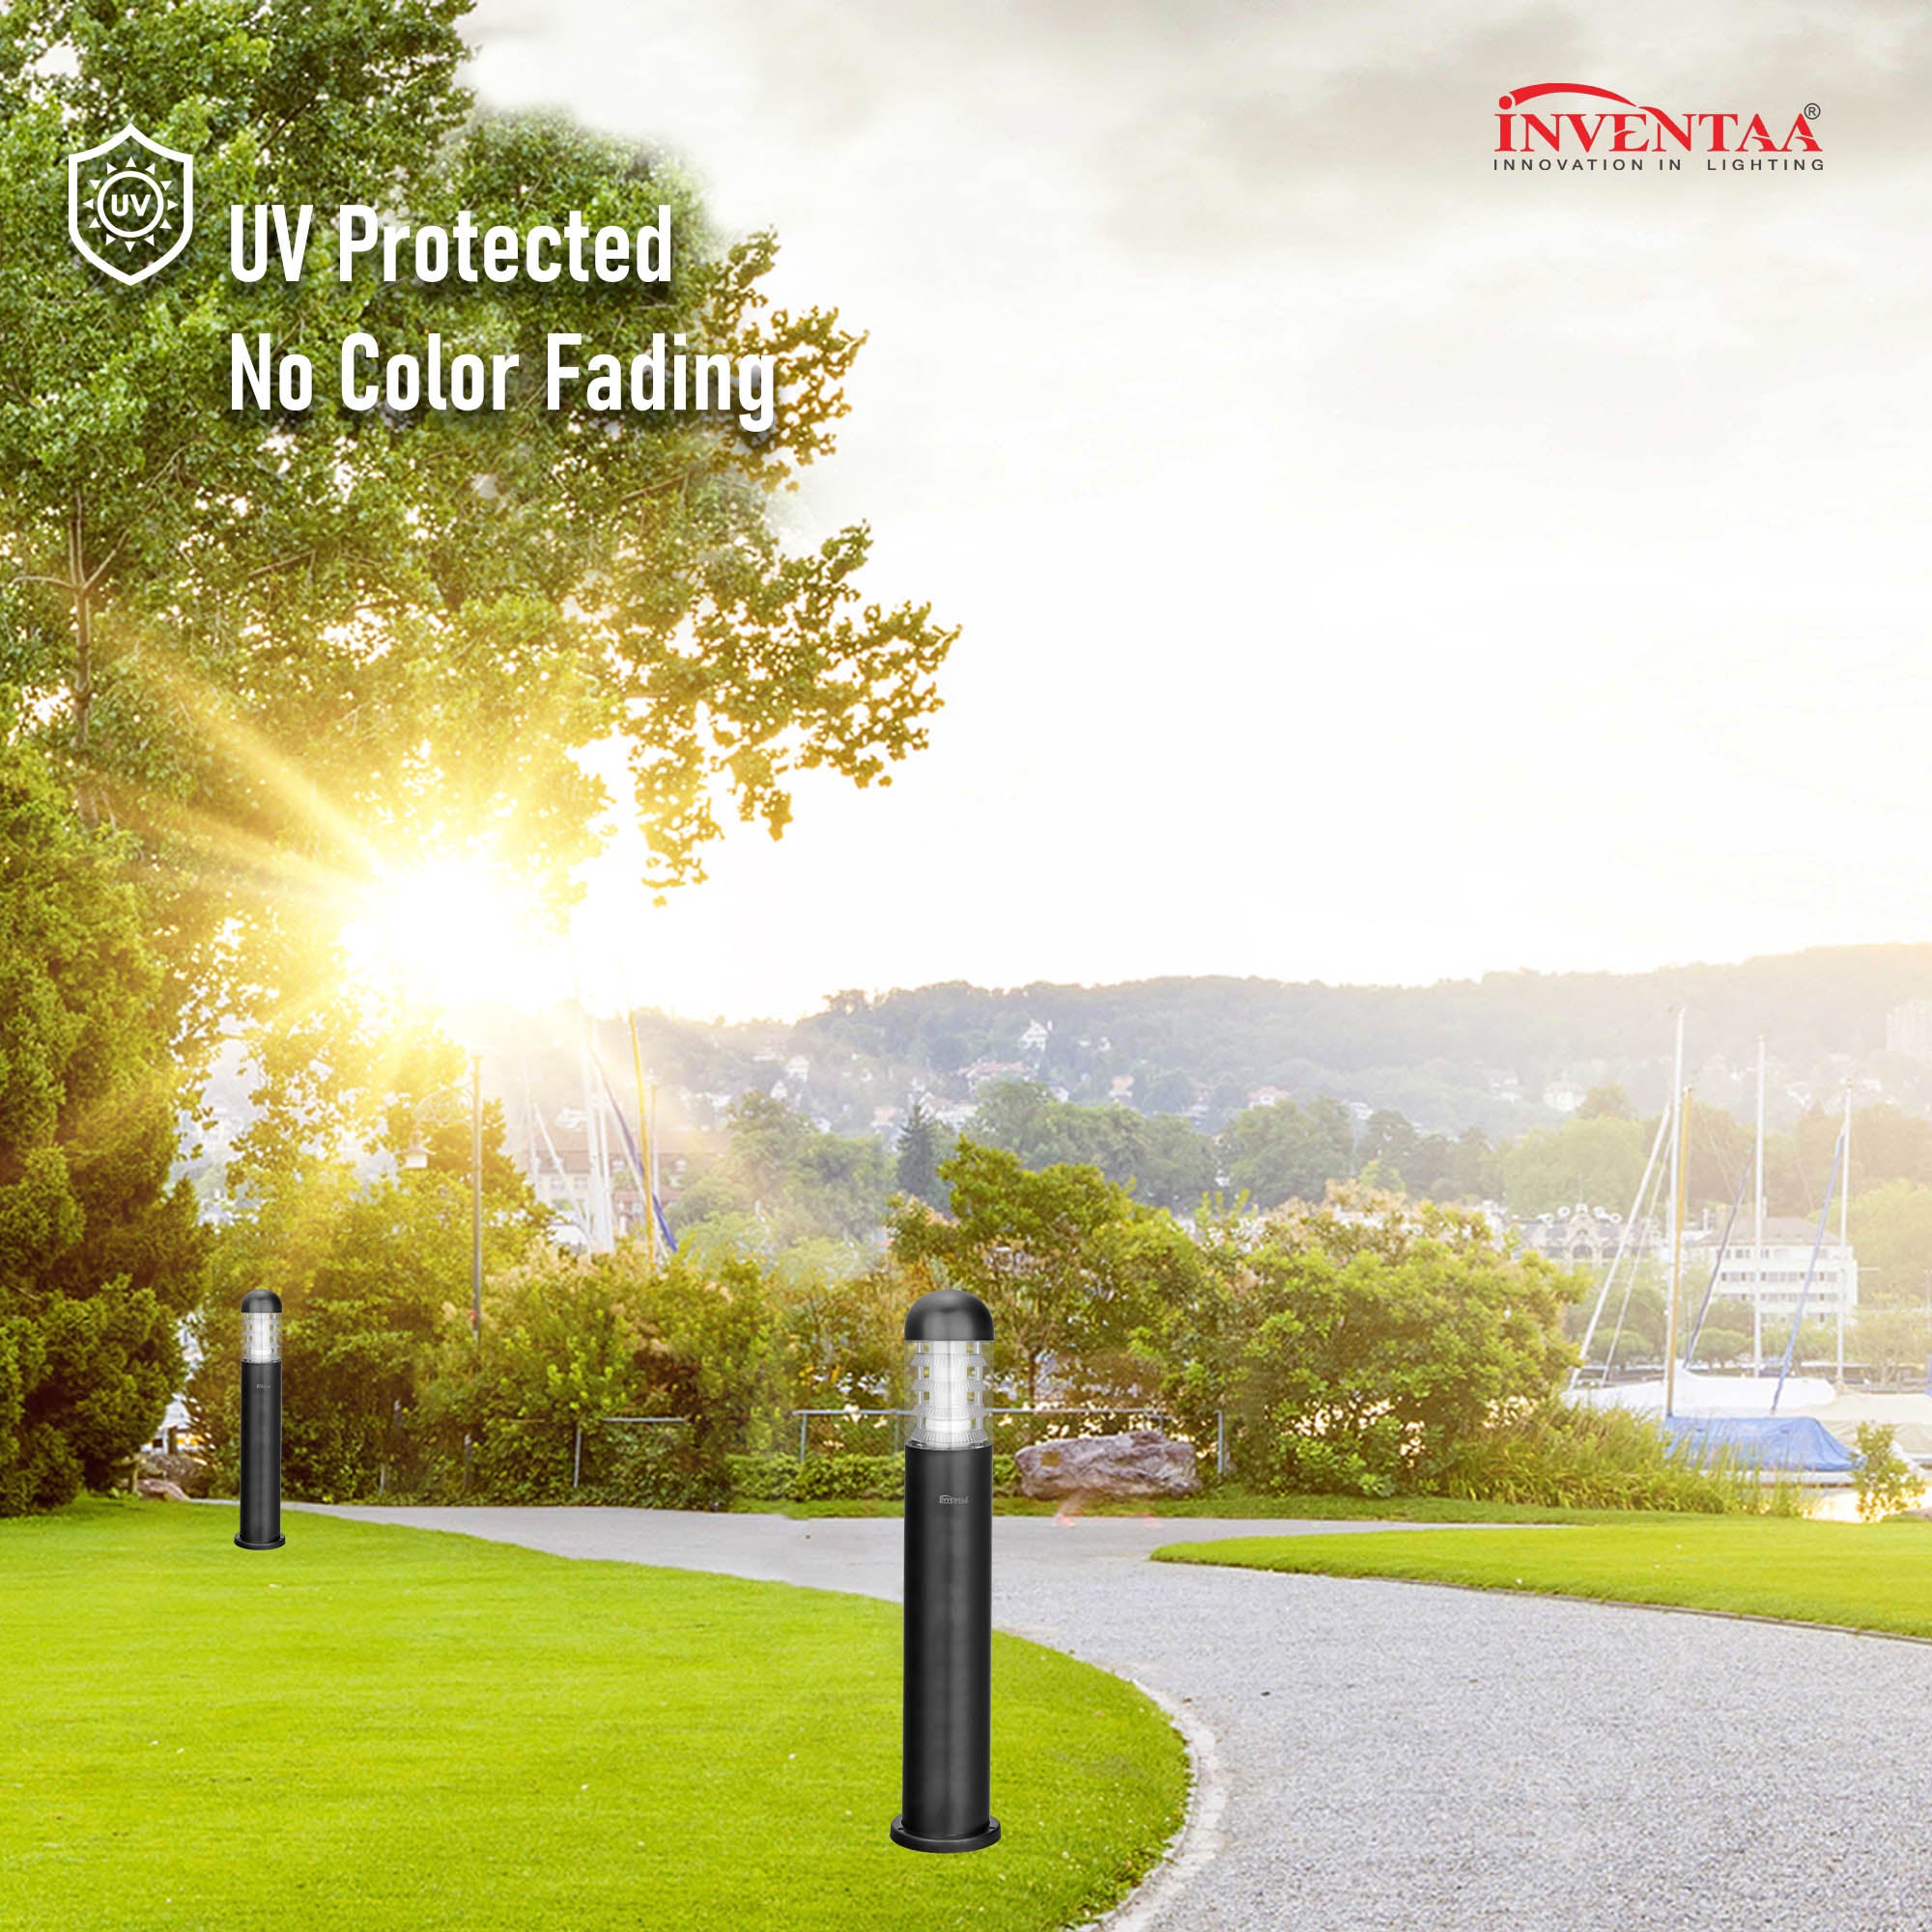 Electra 2 feet led garden bollard light featuring its UV protection and no color fade resistant for enduring performance #size_2 feet